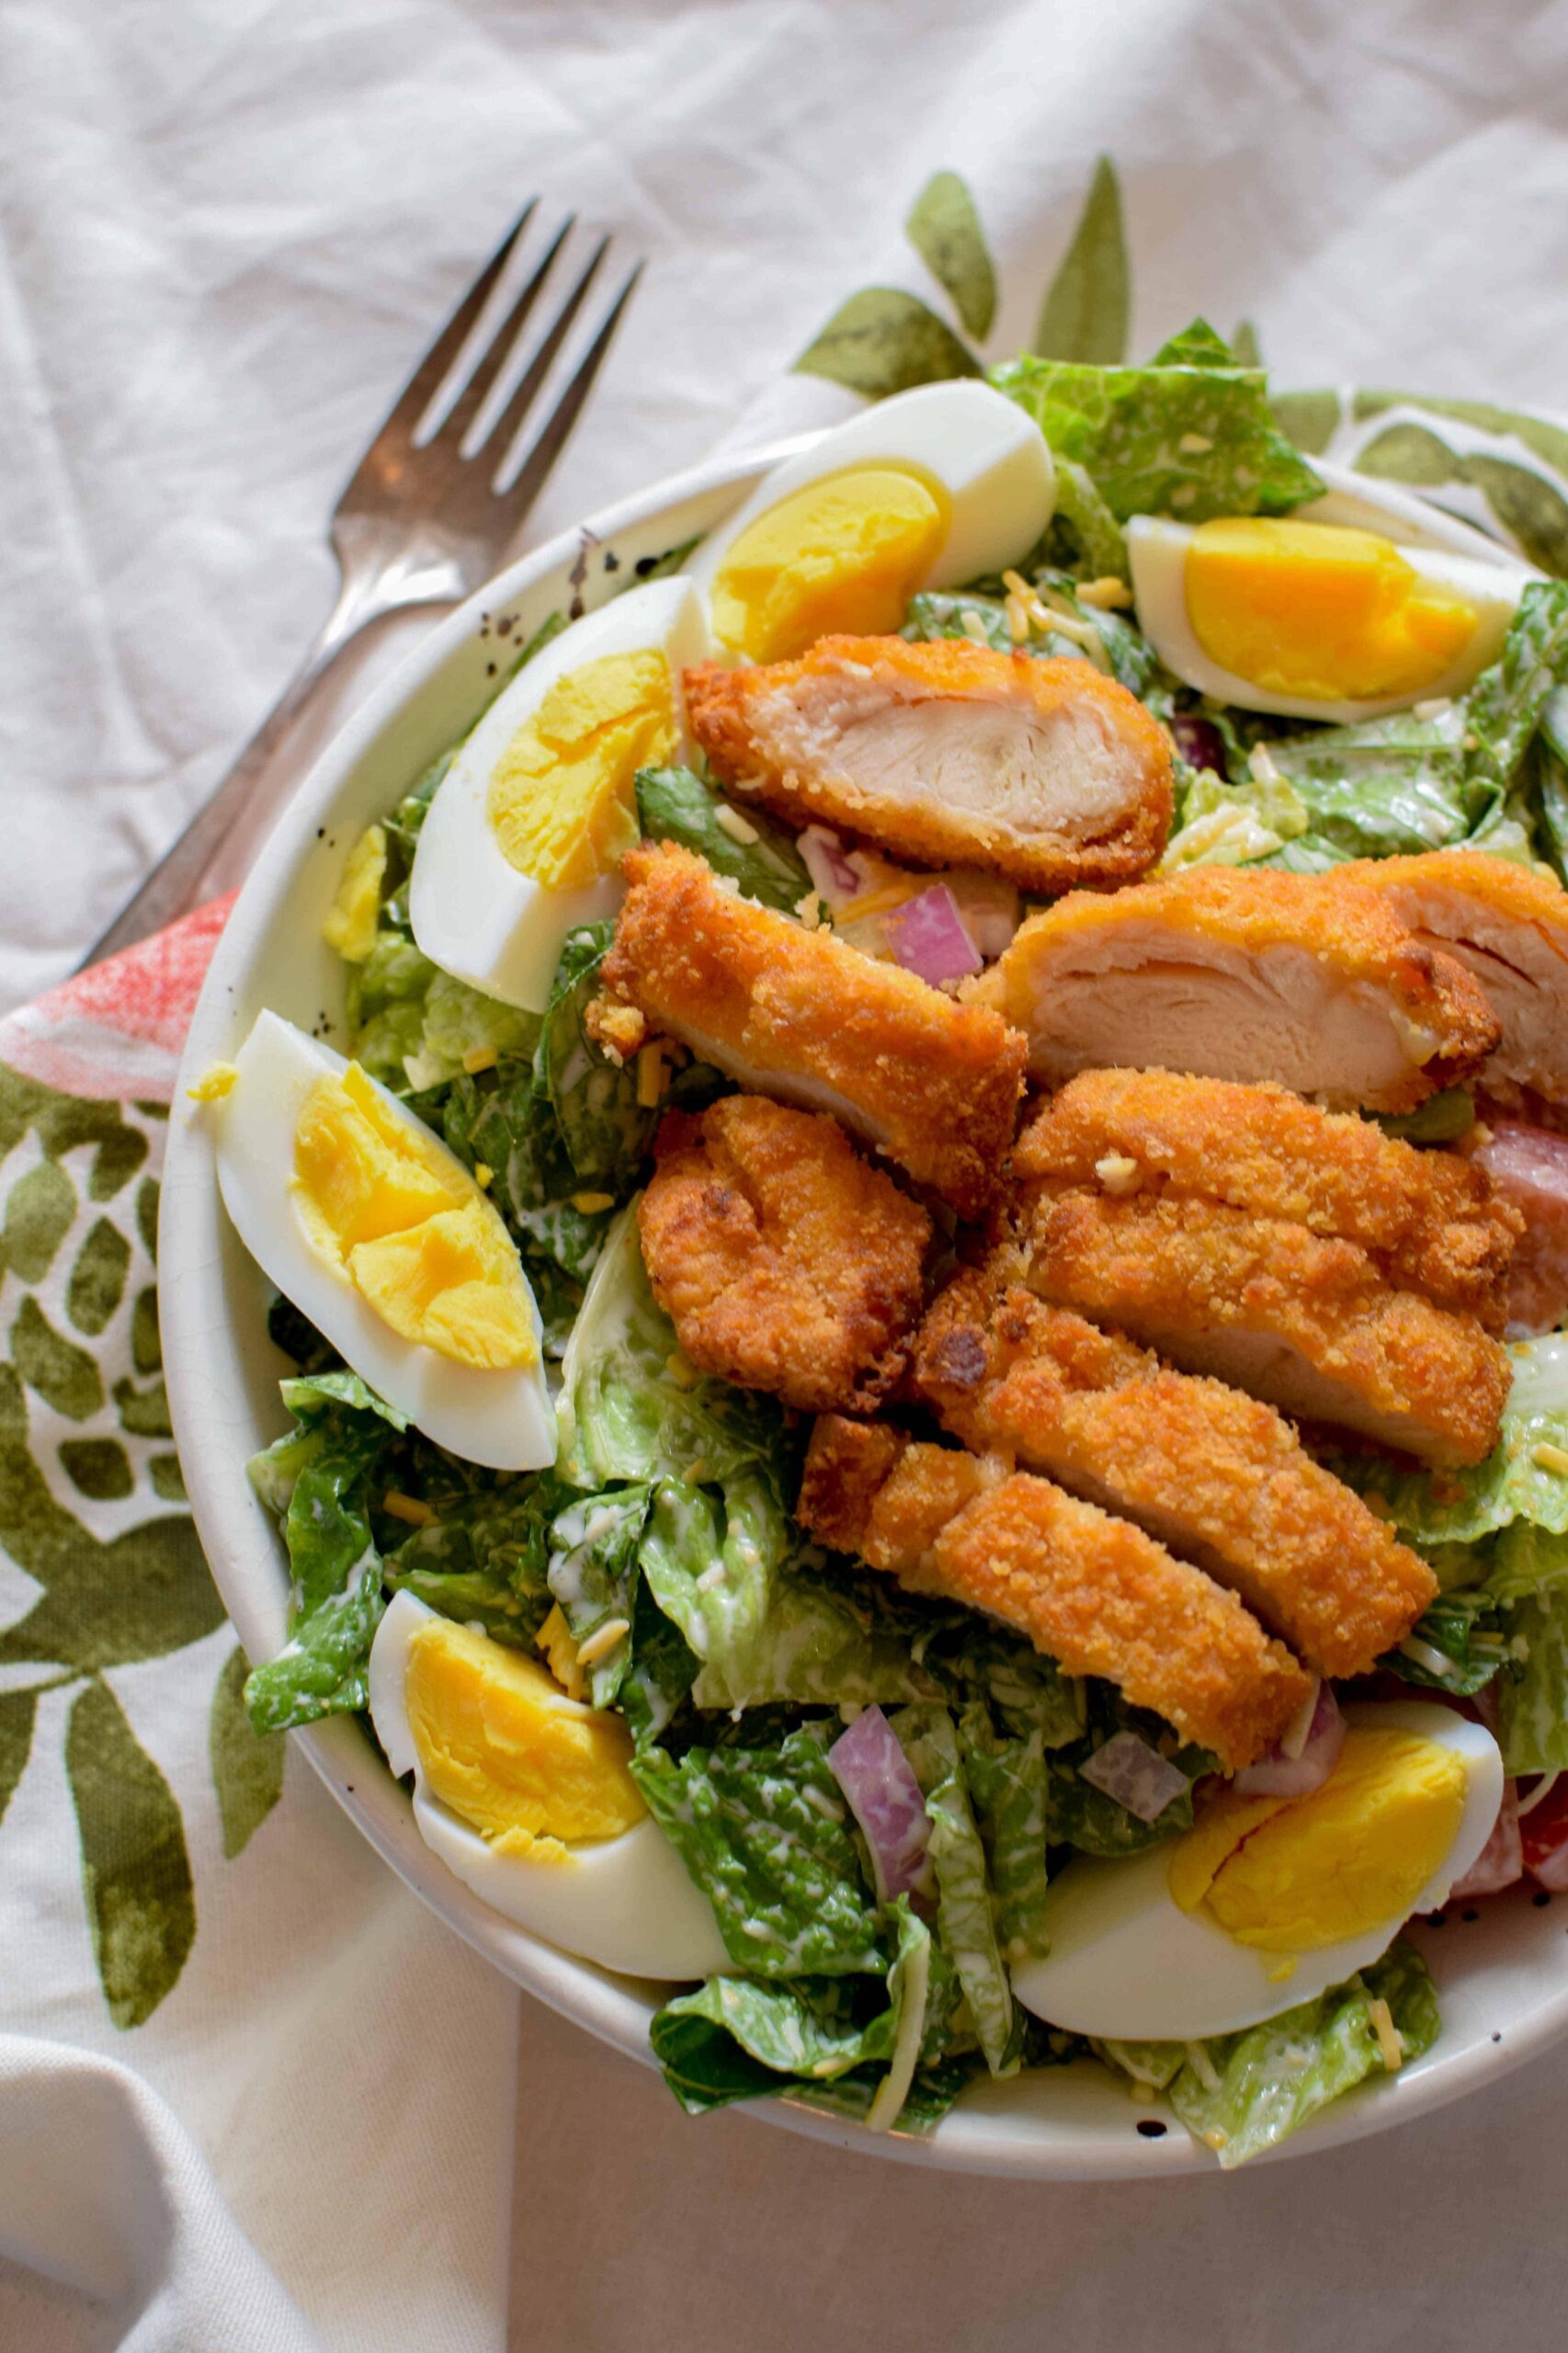  Add some crispy crunch to your greens with this southern-style chicken salad